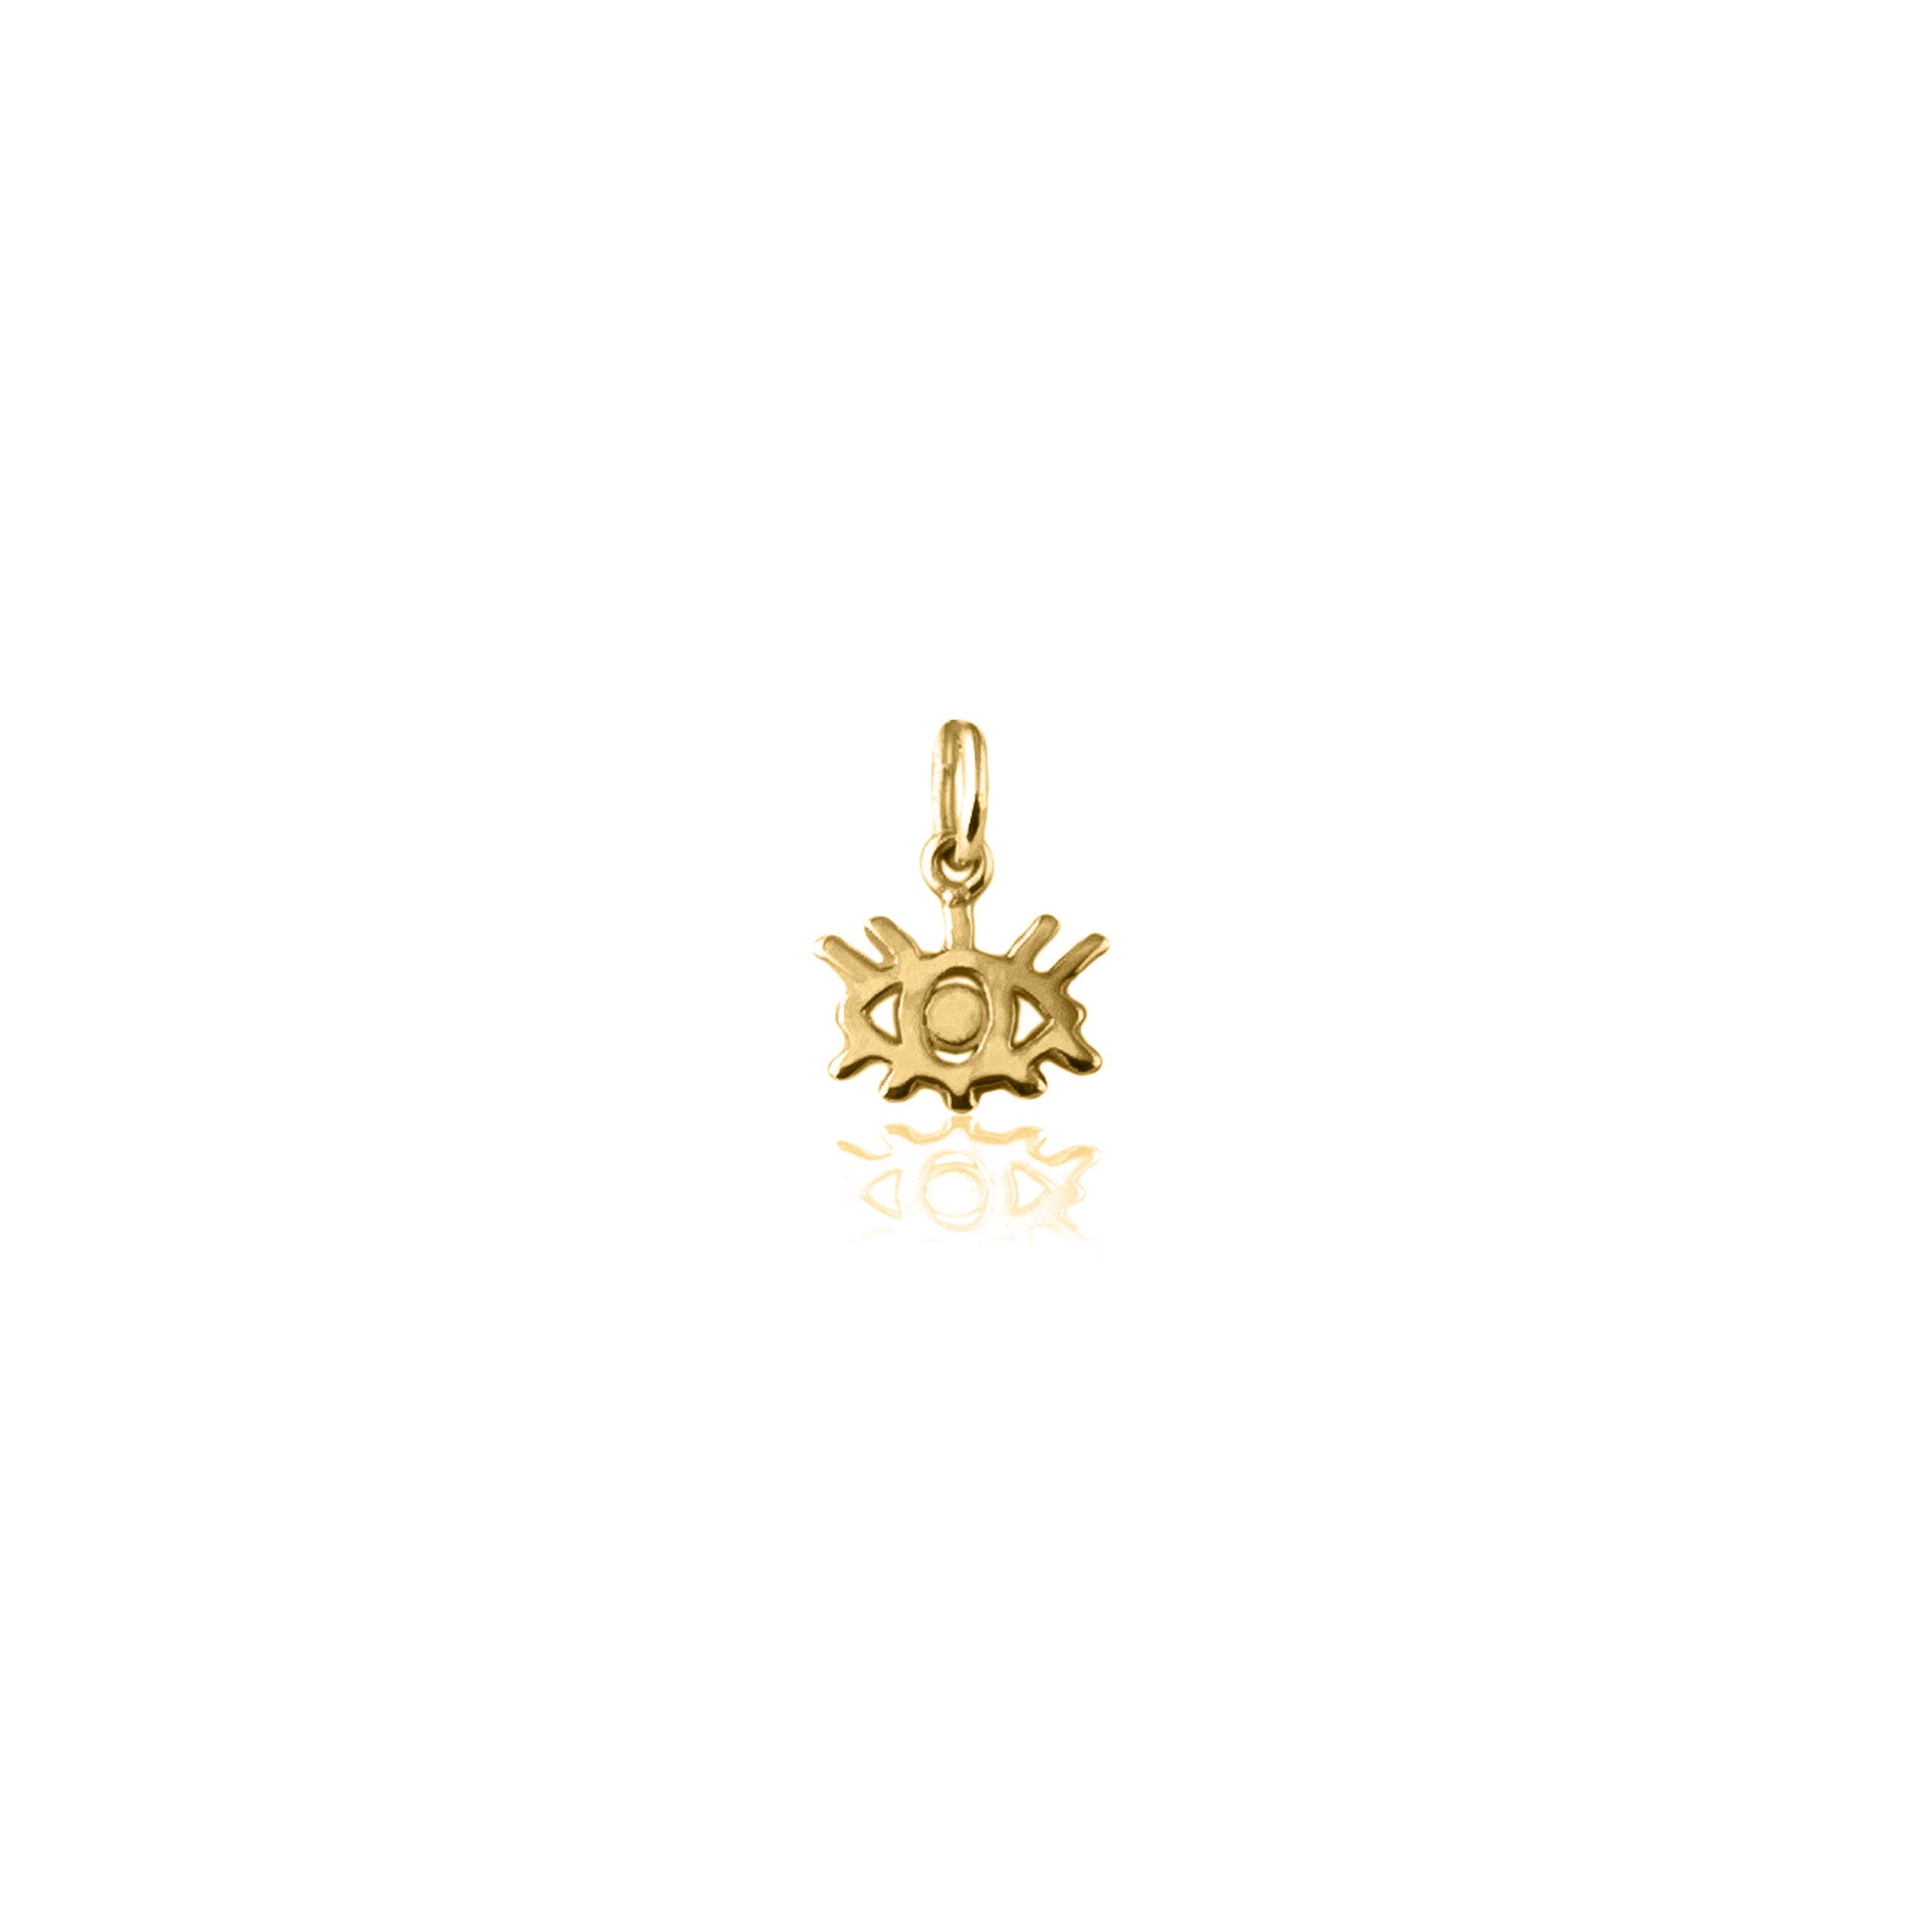 Protective Eye Charm in Yellow Gold